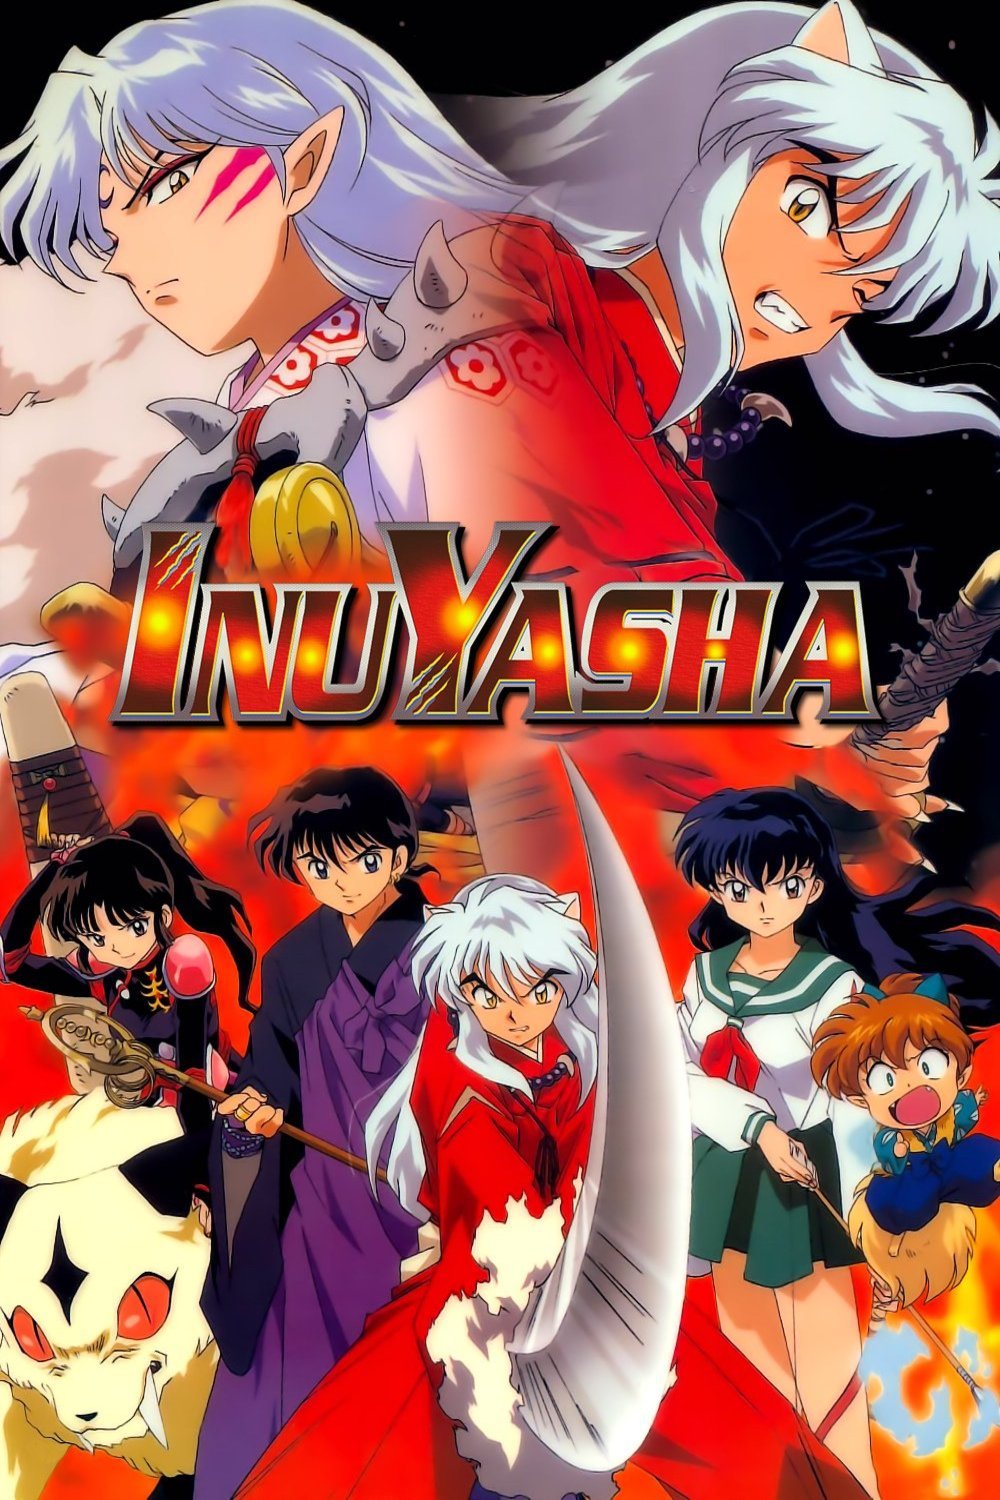 Japanese poster of the movie Inuyasha